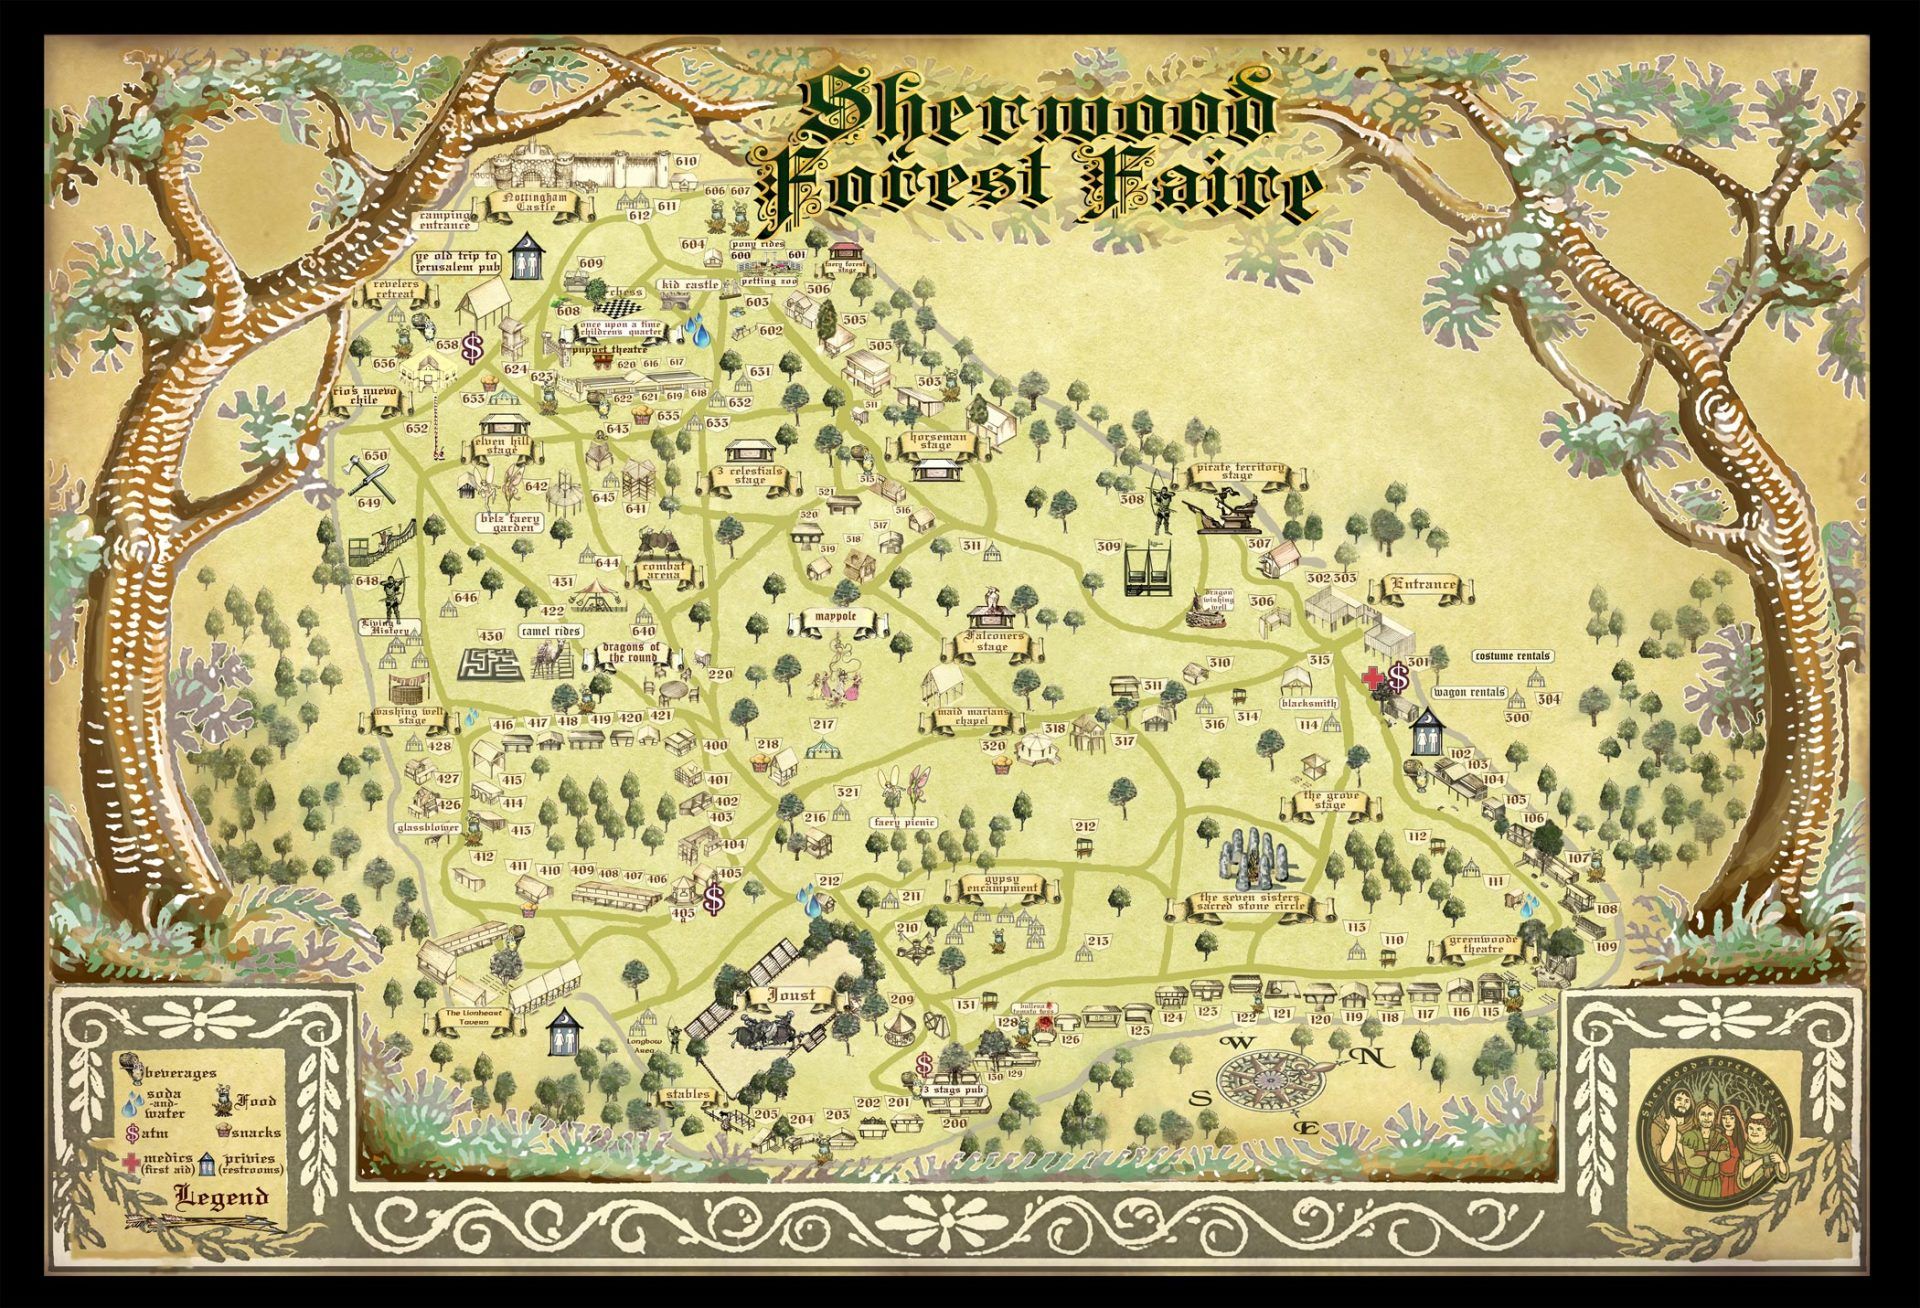 Contact Sherwood Forest Faire McDade, TX 5122226680 info